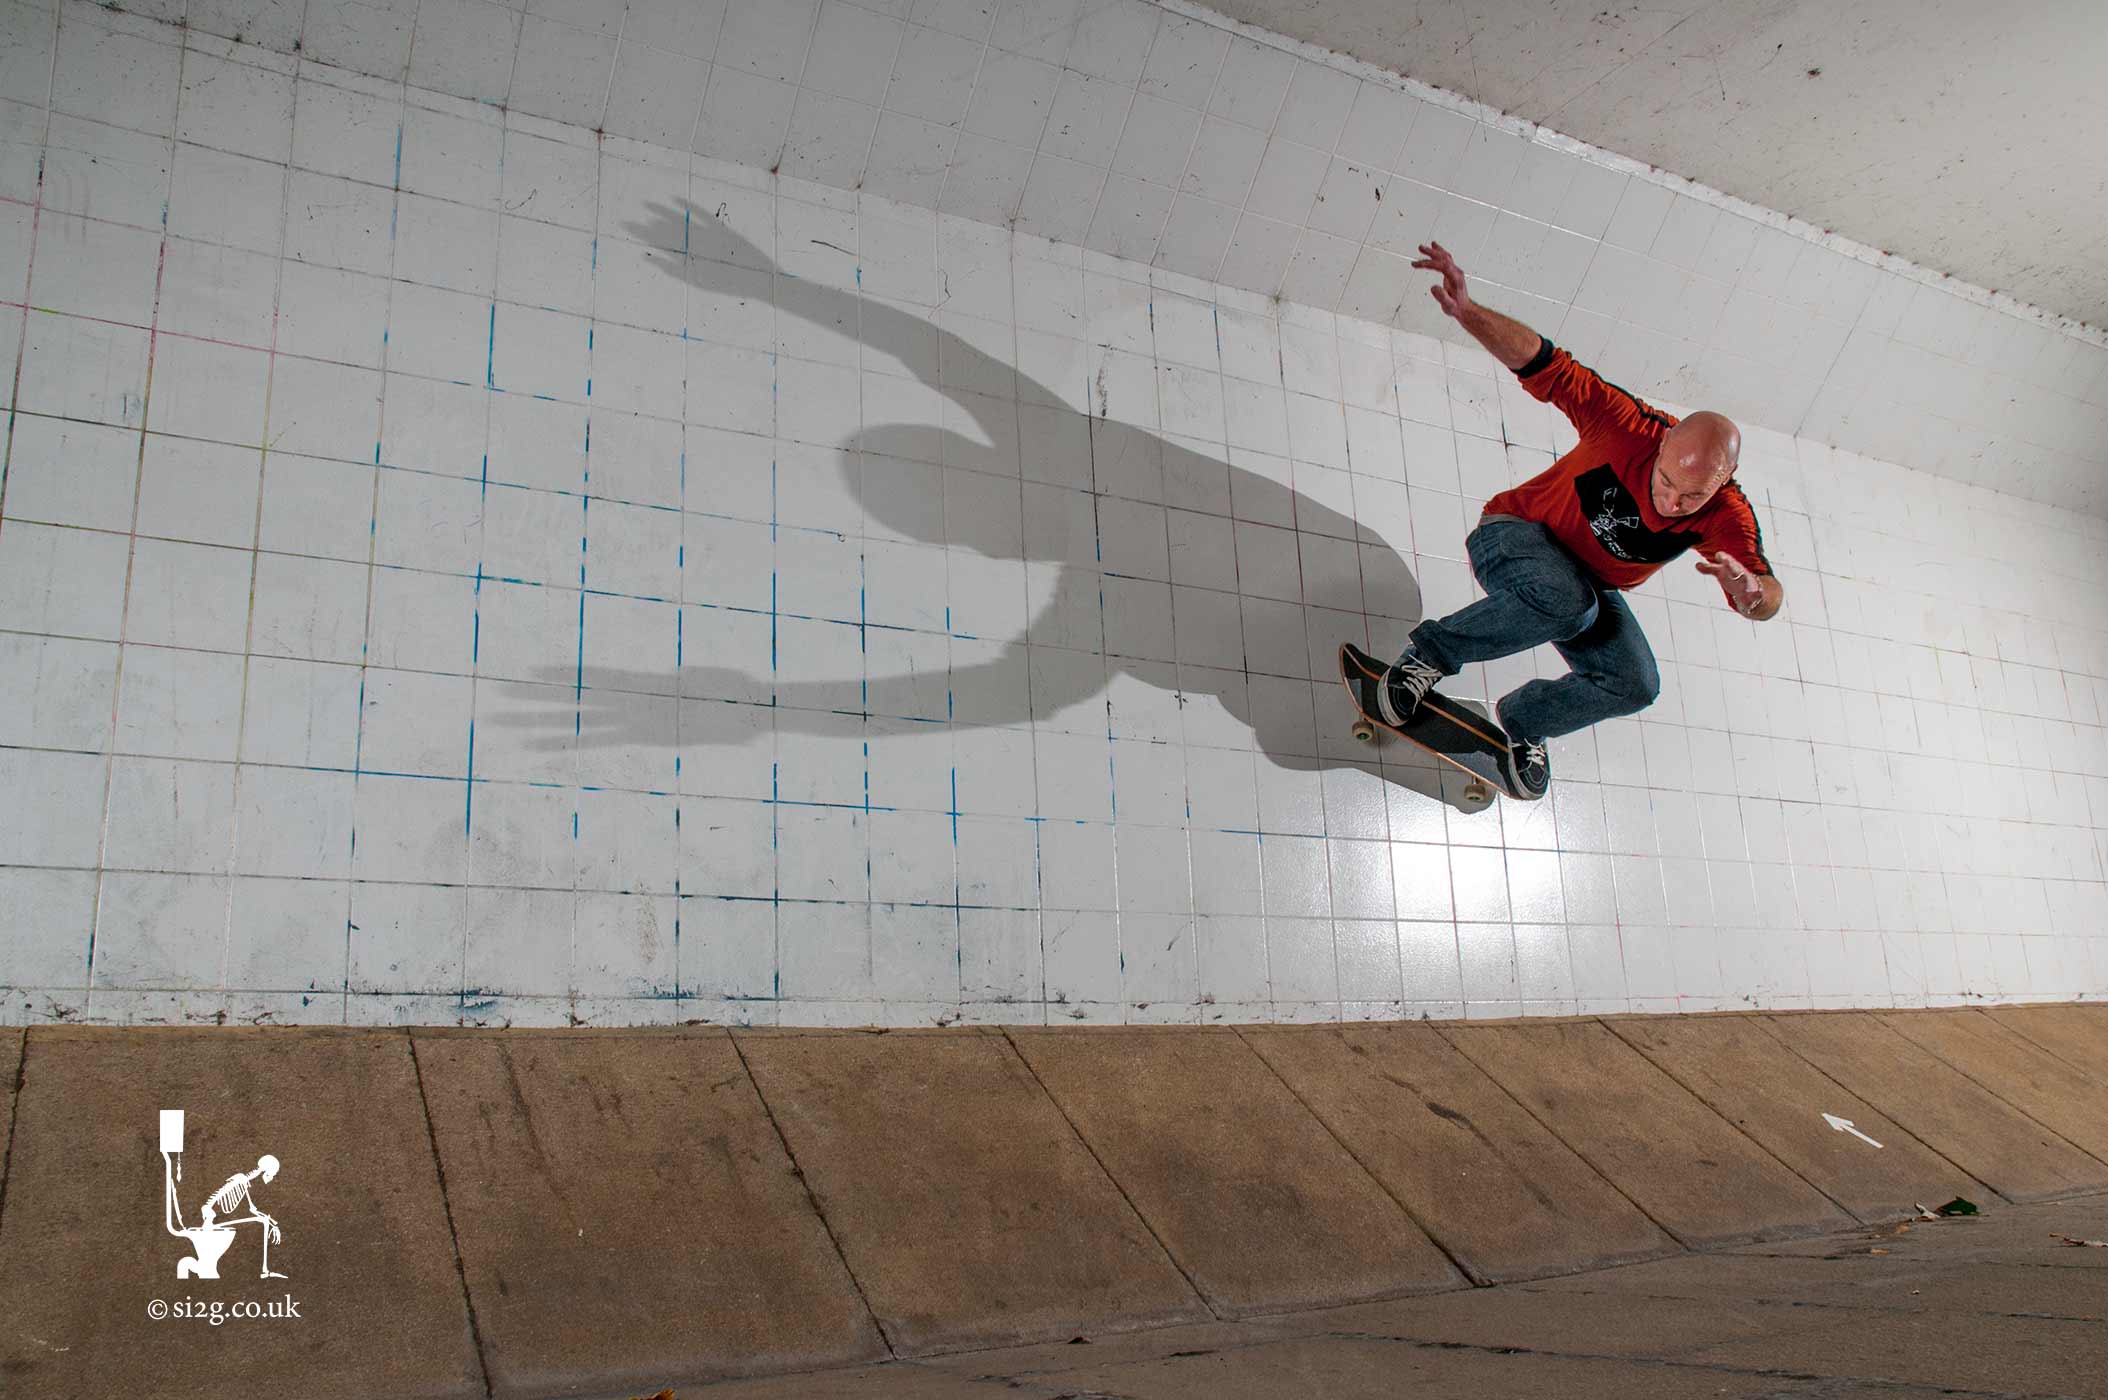 Skateboard Wallride - We set out specifically to capture this image of notorious skateboarder Martin Herrick performing a wallride on his skateboard, with his shadow stretched out across the wall.  In between busy waves of pedestrians using the under-pass Martin rode the wall, time-after-time, while minute adjustments were made to the lighting.